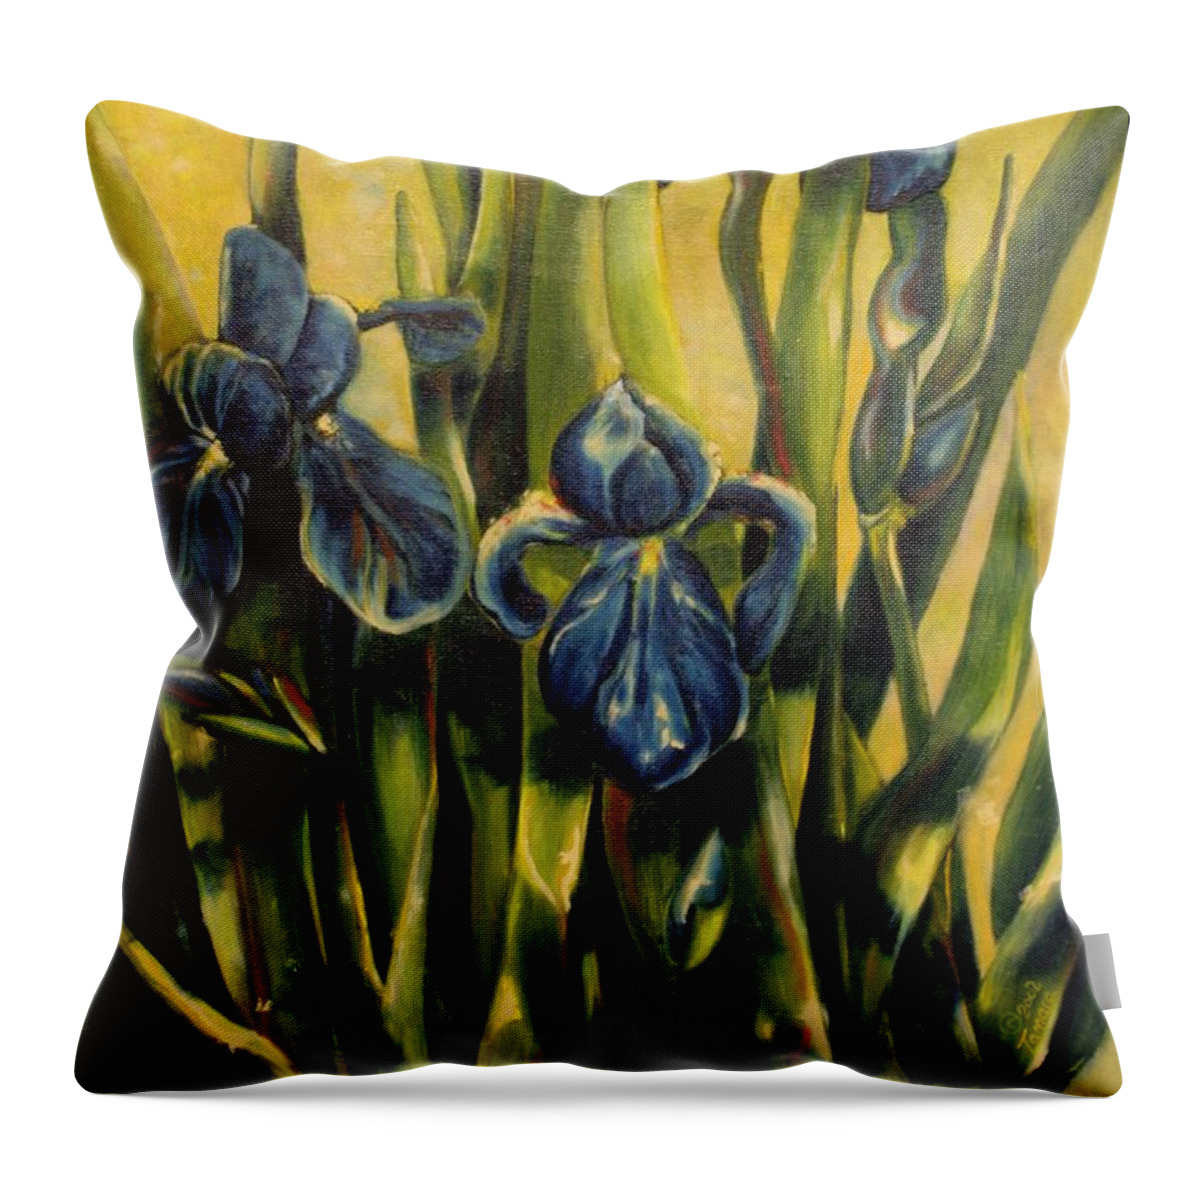 Oil Painting Throw Pillow featuring the painting Moody Irises by Tamara Kulish